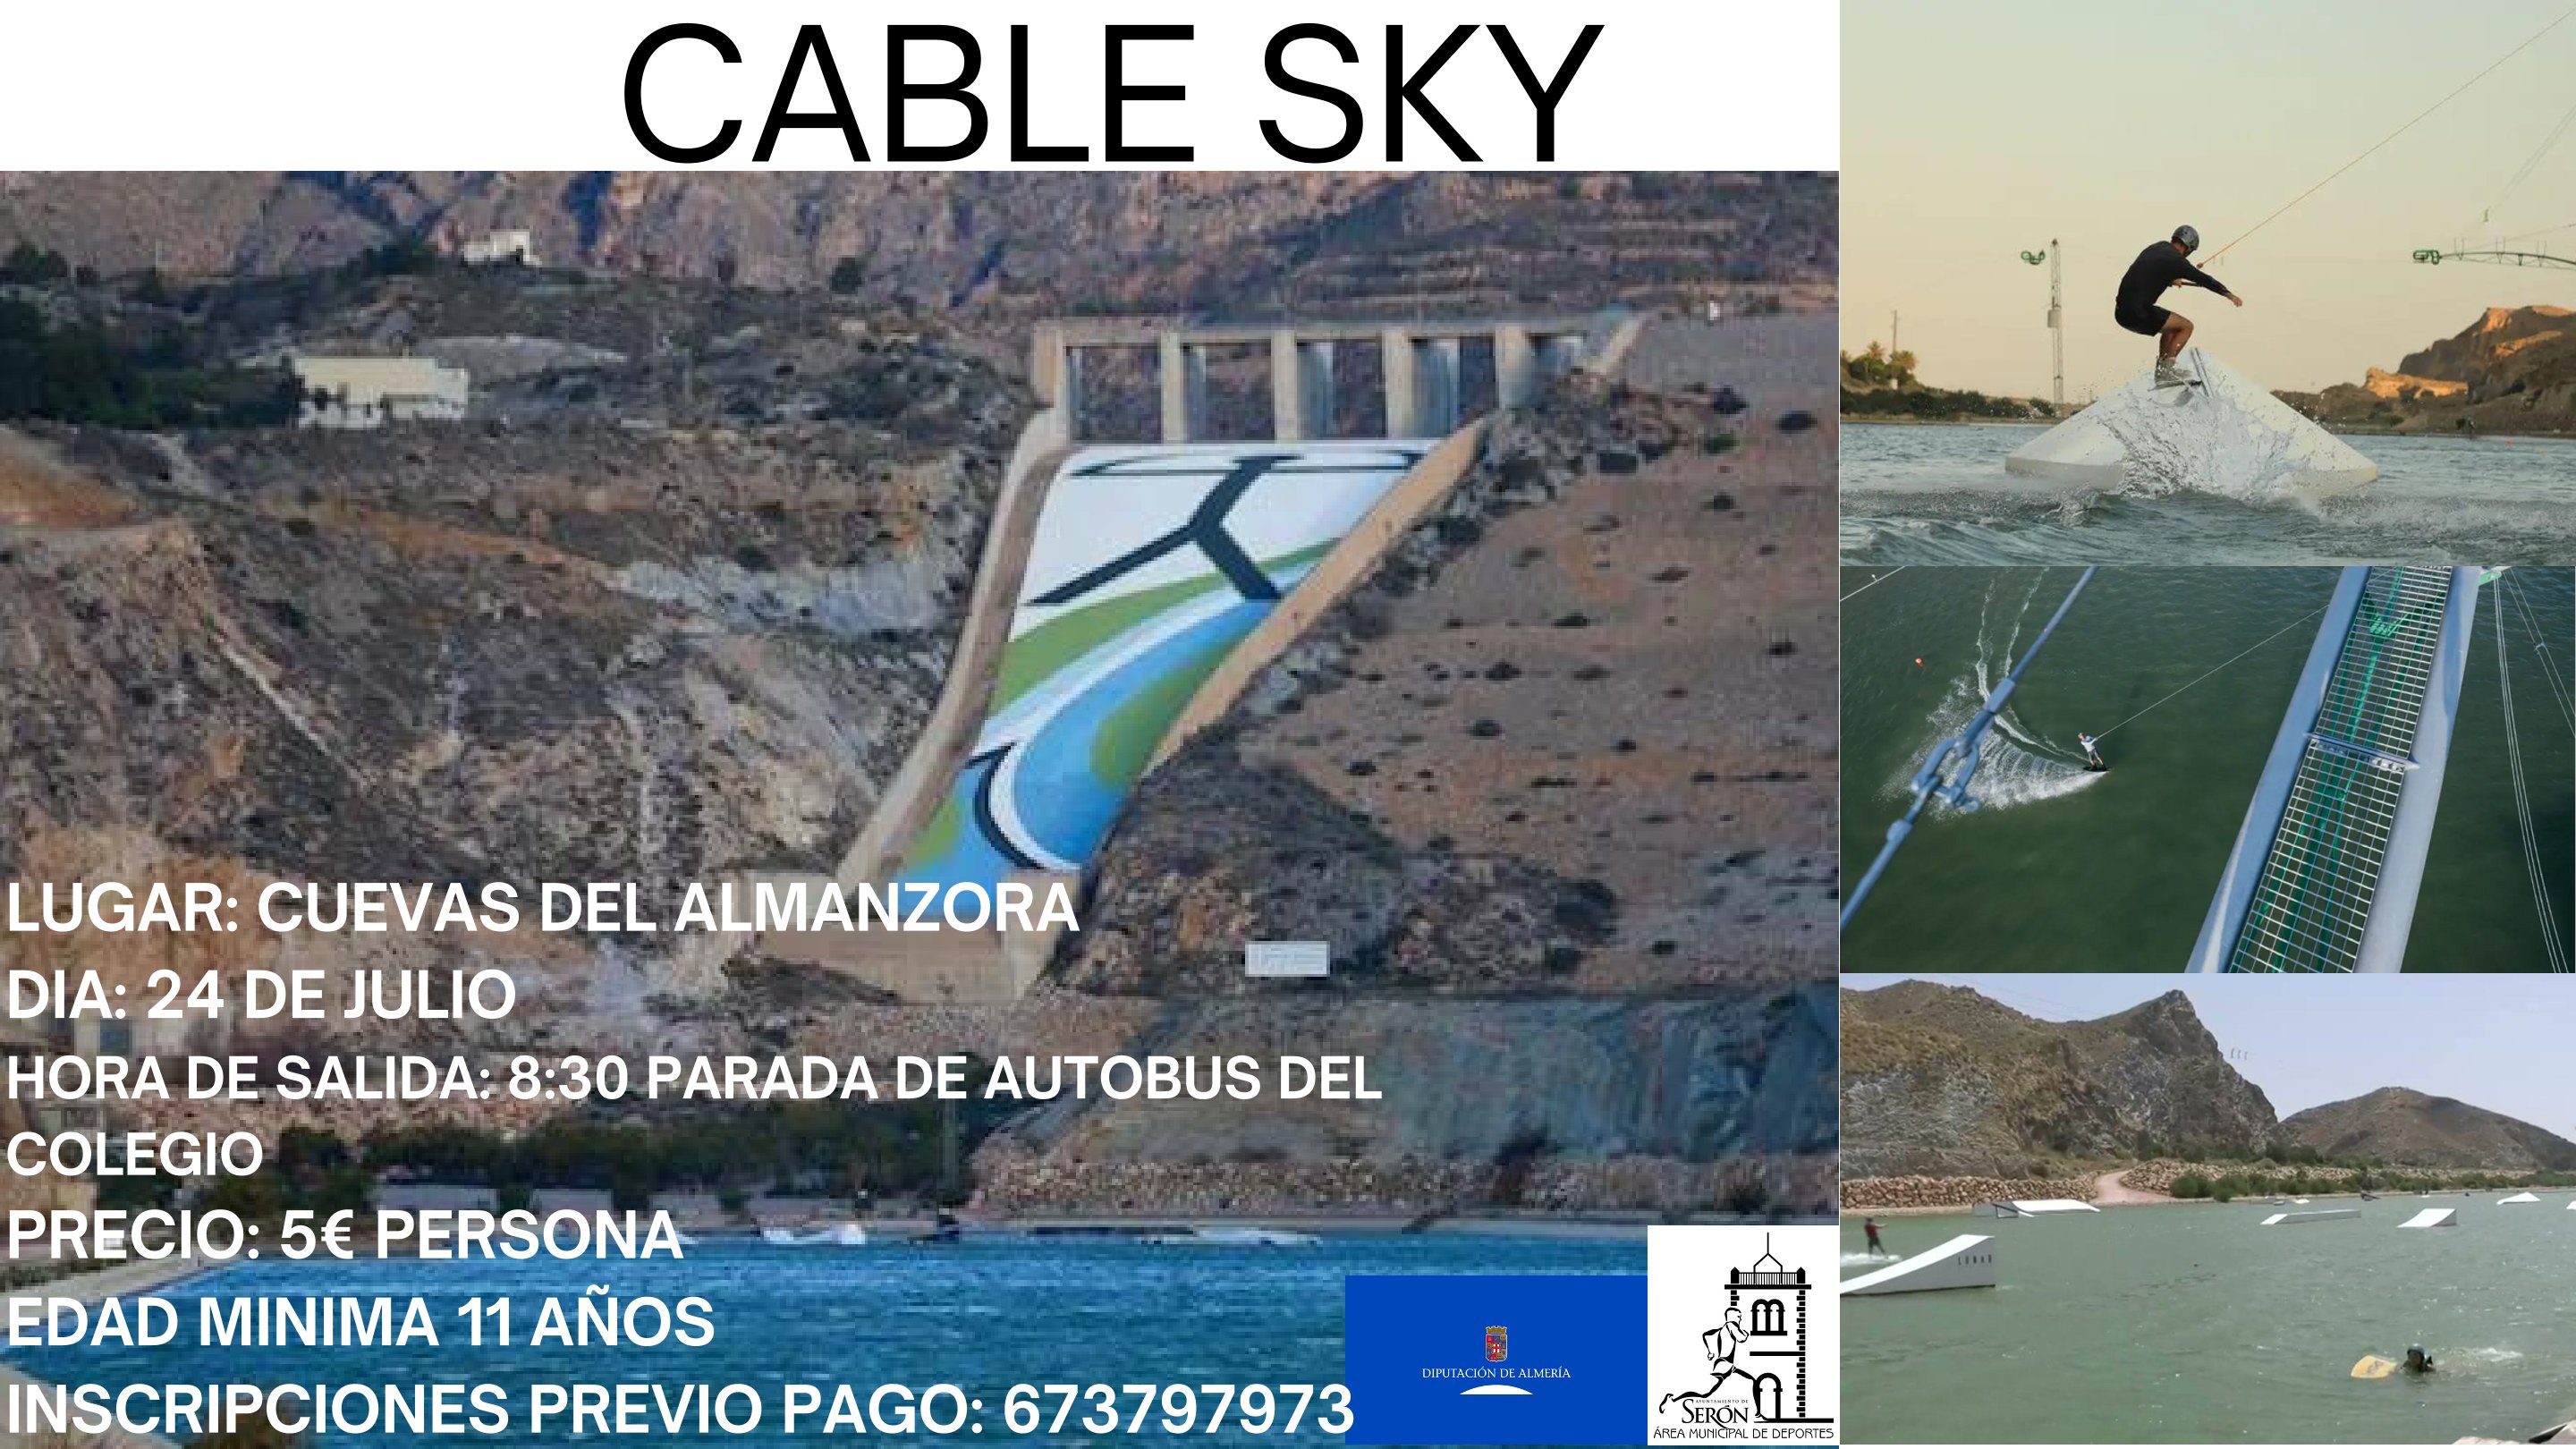 CABLE SKY